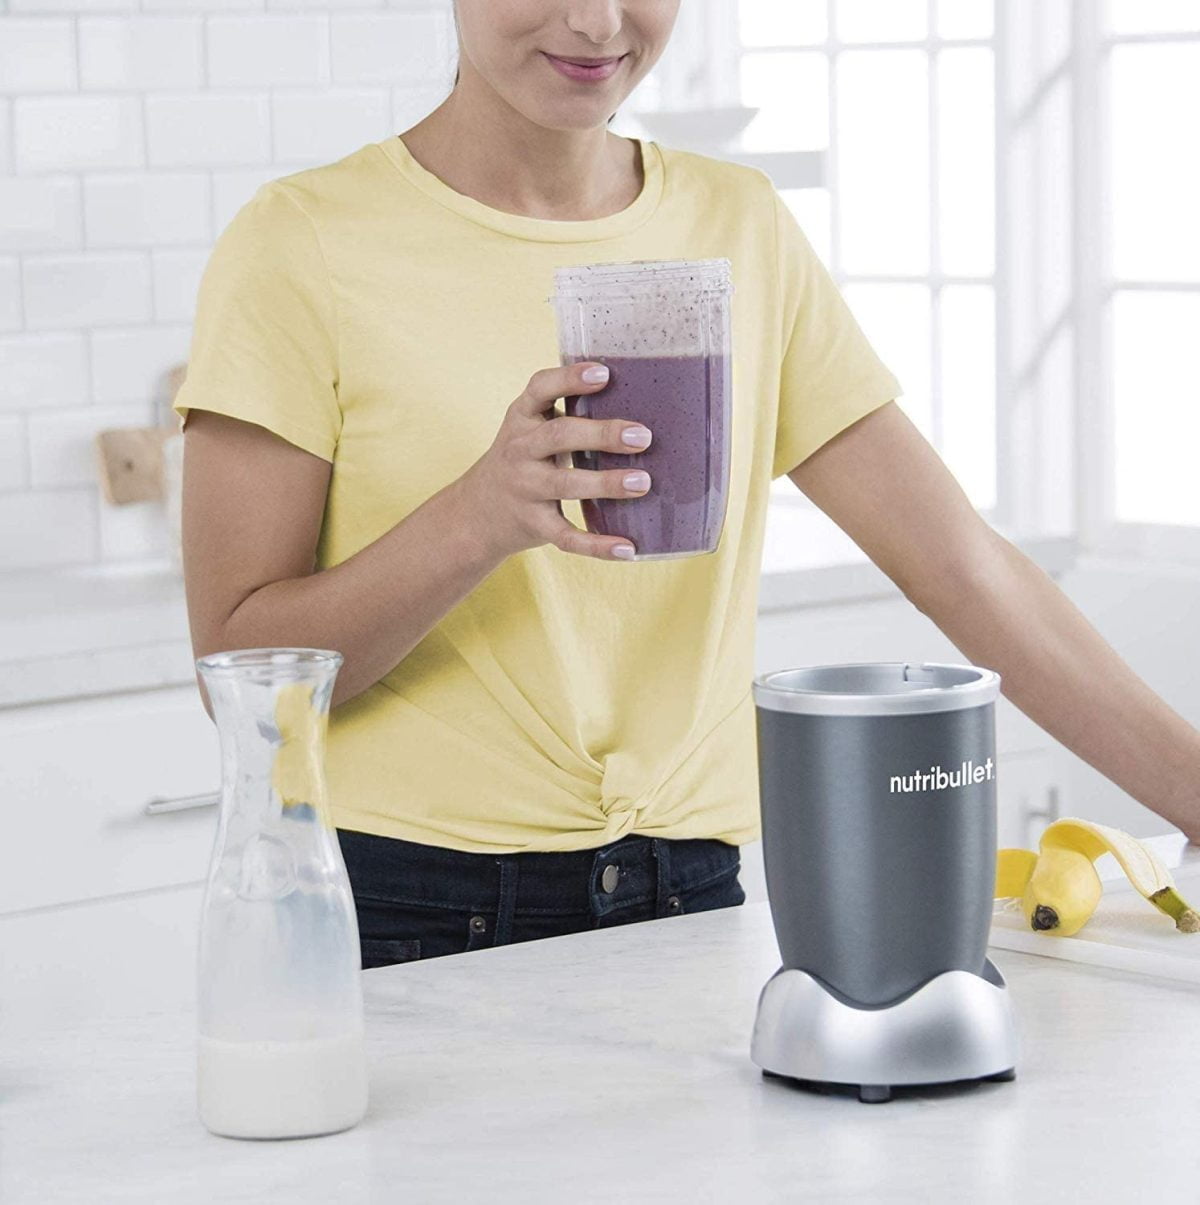 615Ytsjqm8L. Ac Sl1500 Nutribullet &Lt;Ul Class=&Quot;A-Unordered-List A-Vertical A-Spacing-Mini&Quot;&Gt; &Lt;Li&Gt;&Lt;Span Class=&Quot;A-List-Item&Quot;&Gt;Meet The Most Popular Nutribullet, Our Compact-Yet-Powerful Personal Blender. You Choose What Goes In To Get The Most Out Of Every Ingredient, Every Day.&Lt;/Span&Gt;&Lt;/Li&Gt; &Lt;Li&Gt;&Lt;Span Class=&Quot;A-List-Item&Quot;&Gt;The Nutribullet Is The Fastest, Easiest Solution For Making Nutrient-Packed Smoothies. Load It Up With Your Favorite Whole Foods Like Nuts, Berries, And Spinach, Then Push, Twist, And Blend Your Way To A Healthier Lifestyle.&Lt;/Span&Gt;&Lt;/Li&Gt; &Lt;Li&Gt;&Lt;Span Class=&Quot;A-List-Item&Quot;&Gt;Powerful 600-Watt Motor And Refined Nutrient-Extraction Blades Blend Whole Foods Into Liquid Fuel For Your Body - In Seconds.&Lt;/Span&Gt;&Lt;/Li&Gt; &Lt;Li&Gt;&Lt;Span Class=&Quot;A-List-Item&Quot;&Gt;Hassle-Free Cleaning - Simply Twist Off The Blade, Rinse With Soap And Water, And Put The Cups In The Top Rack Of The Dishwasher.&Lt;/Span&Gt;&Lt;/Li&Gt; &Lt;Li&Gt;&Lt;Span Class=&Quot;A-List-Item&Quot;&Gt;What You Get: (1) 600 Watt Motor Base, (1) Extractor Blade, (1) 700Ml Cup, (1) 500Ml Cup, (1) Lip Ring With Handle, (1) Solid Lid, (1) User Guide, (1) Recipe Book. 2 Years Brand Warranty&Lt;/Span&Gt;&Lt;/Li&Gt; &Lt;/Ul&Gt; Nutribullet Nutribullet 600 Watts, 8 Piece Set, Multi-Function High Speed Blender, Mixer System With Nutrient Extractor, Smoothie Maker, Gray